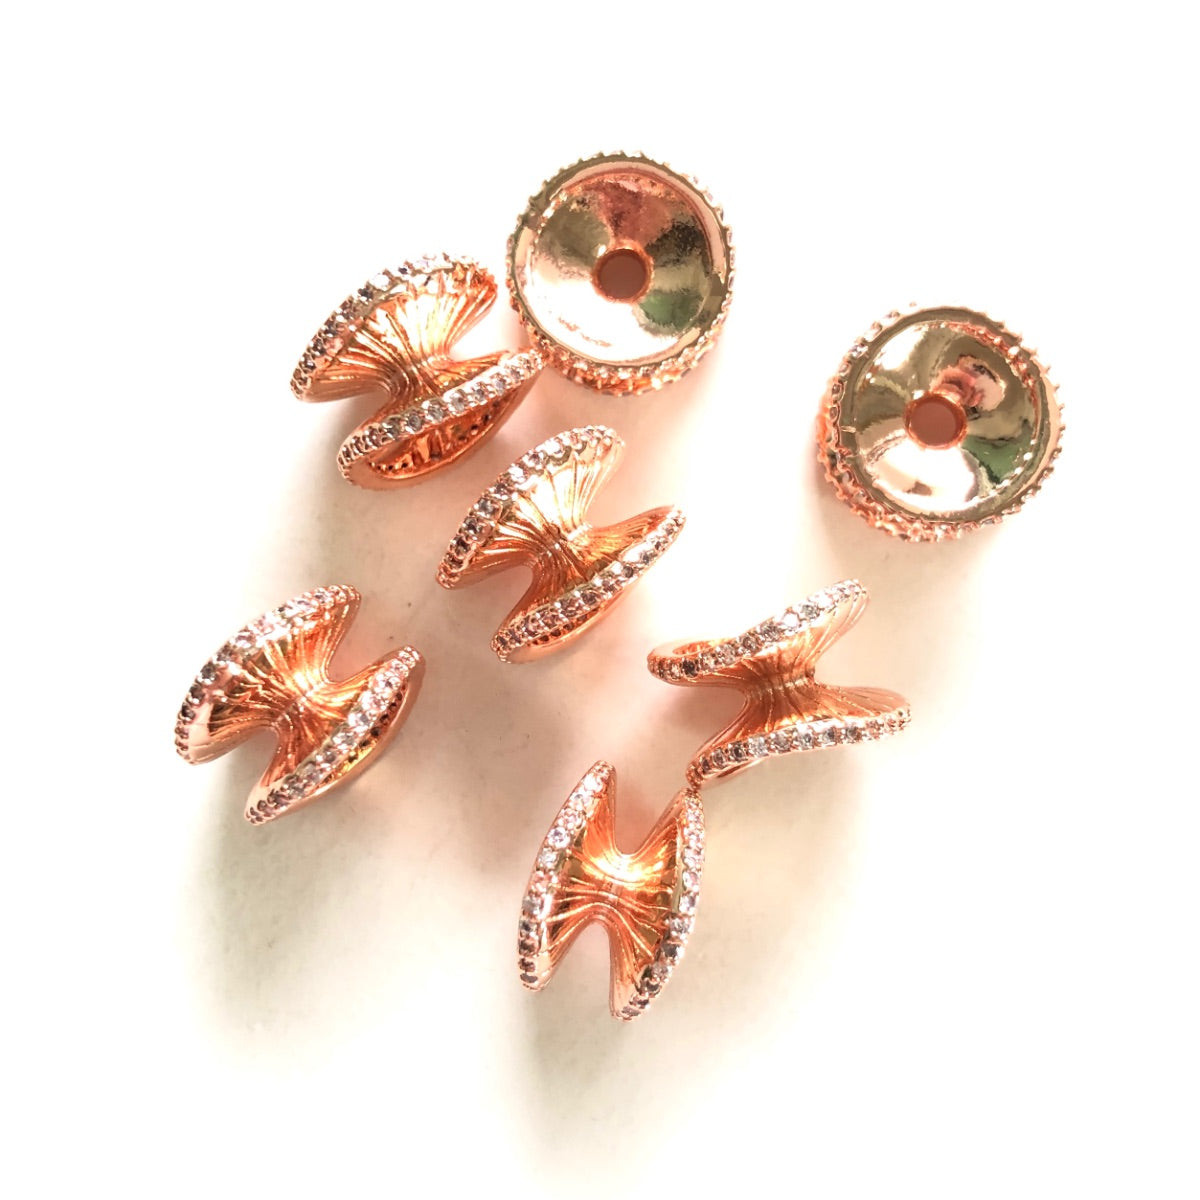 10pcs/lot 13.3*8.7mm CZ Paved Hourglass Spacers Beads Rose Gold CZ Paved Spacers Hourglass Beads New Spacers Arrivals Charms Beads Beyond